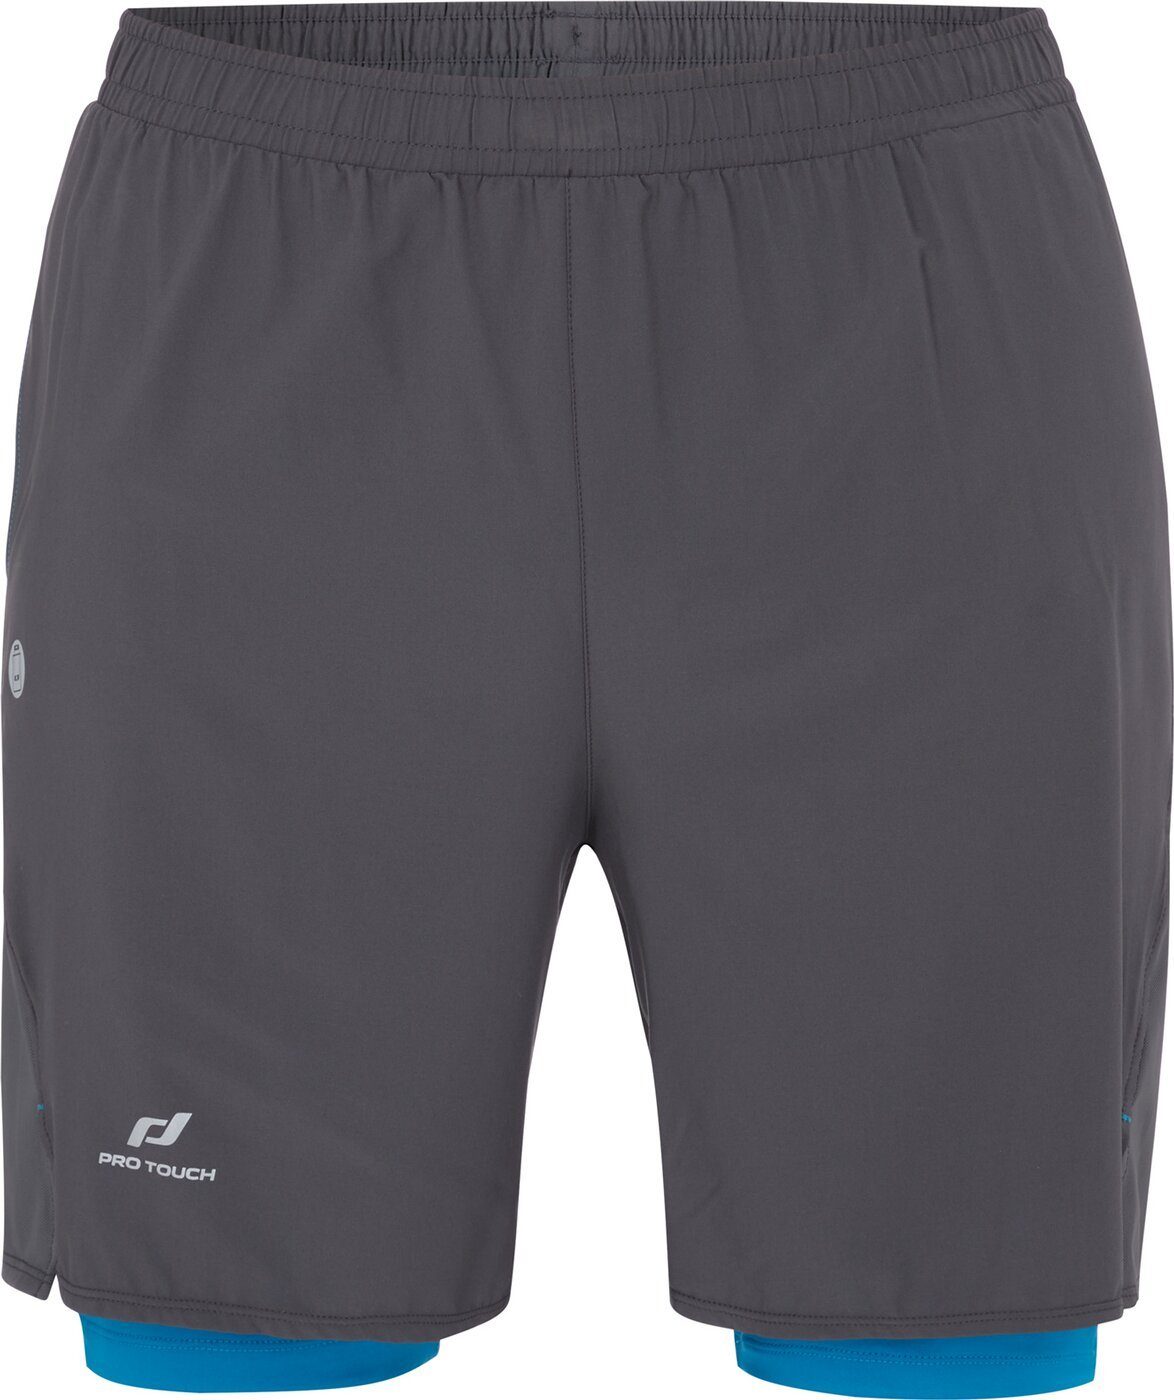 Pro Touch Funktionsshorts Shorts 2-in-1 Striko